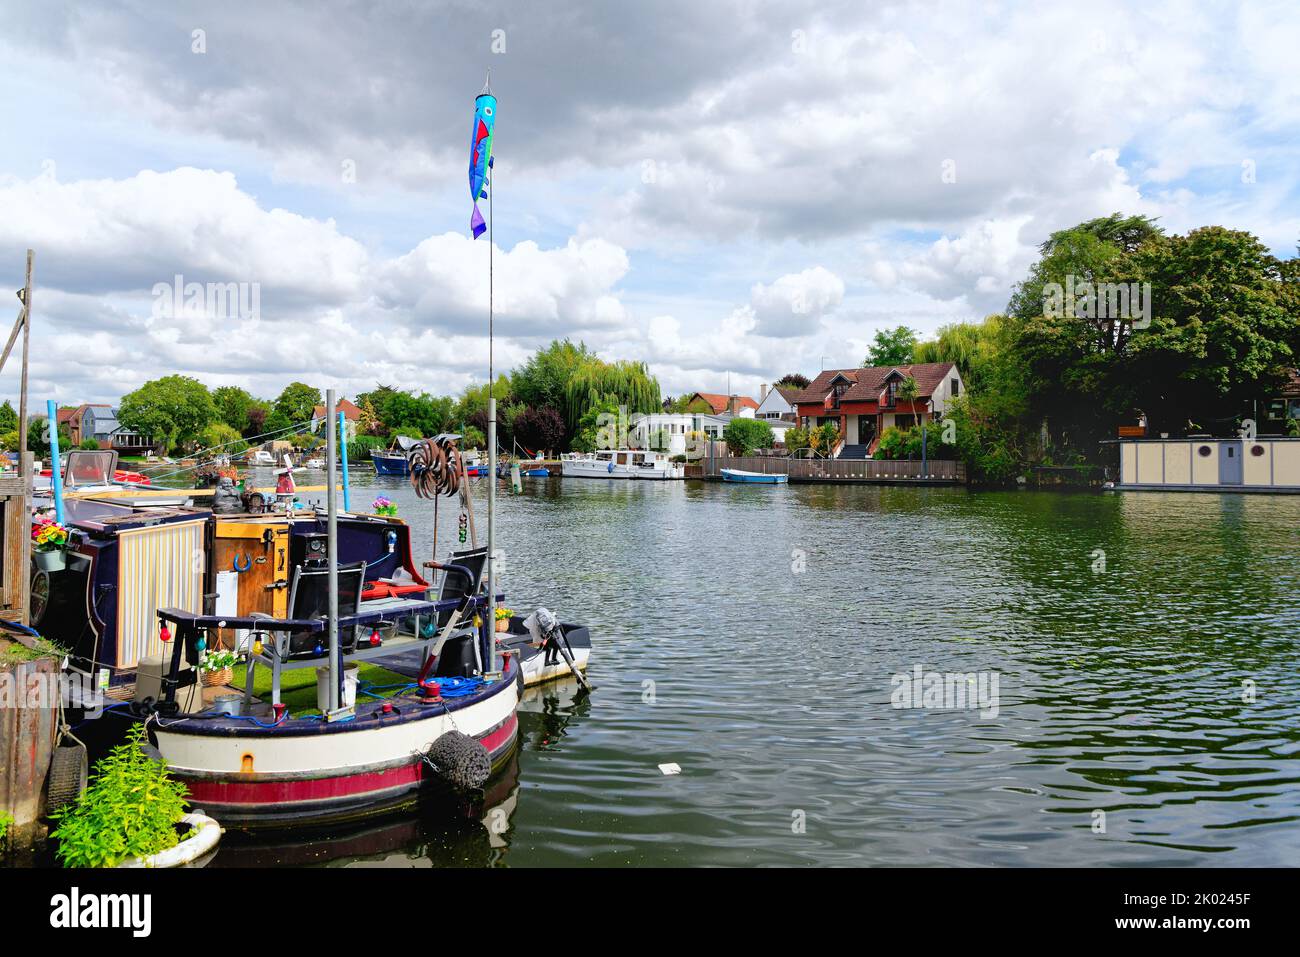 The River Thames at Old Windsor with moored boats and riverside houses, Berkshire England UK Stock Photo